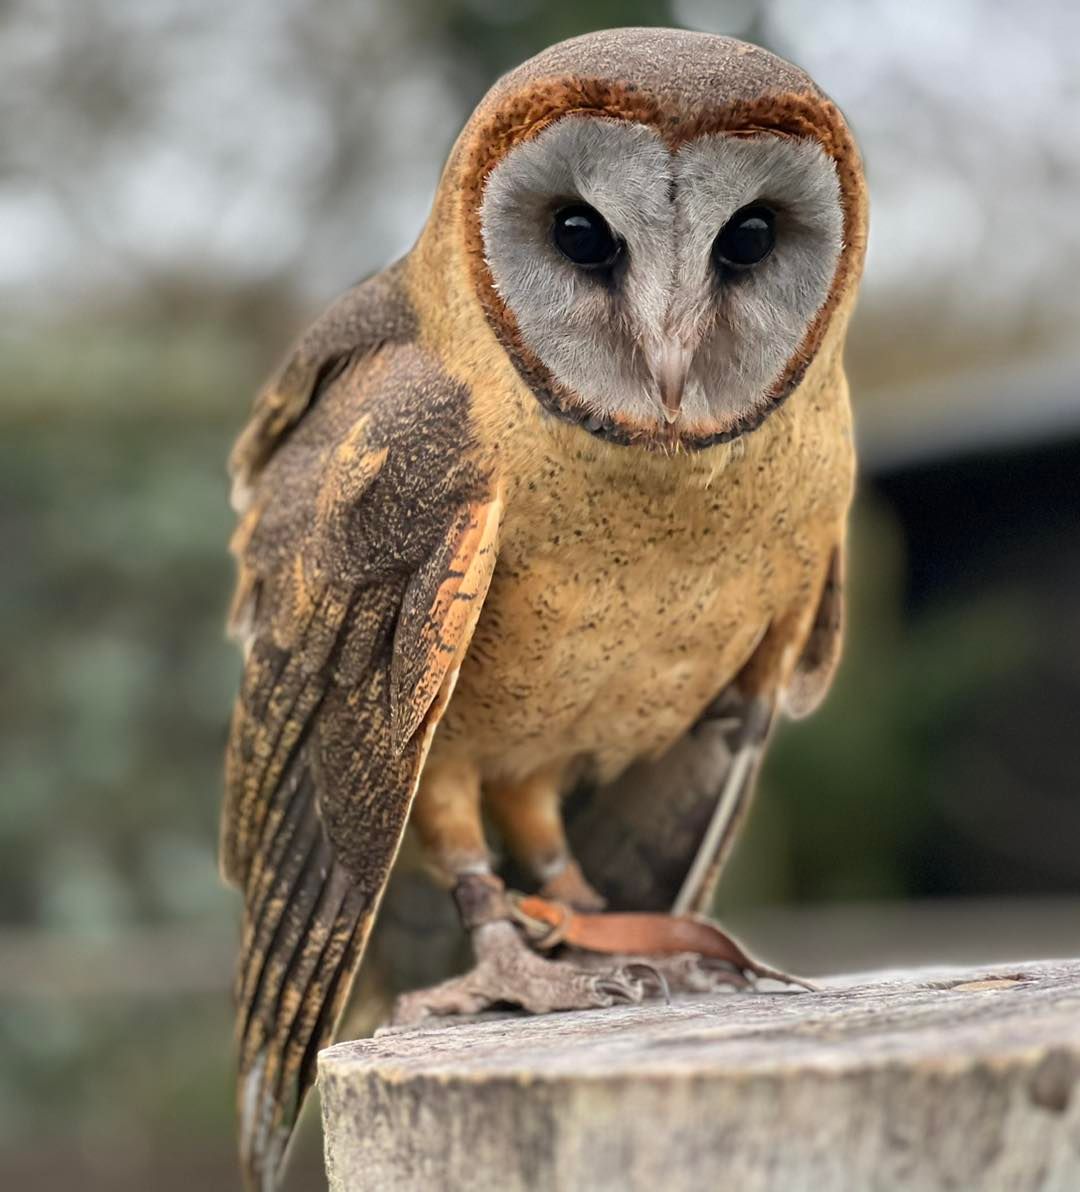 Fact of the week 📖 Barn Owls are a whole family, consisting of around 20 species! Found nearly everywhere on the planet, they come in all different shapes and sizes. Pictured is Angel, a cheeky Ashy-faced Barn Owl (Tyto glaucops), native to the Caribbean. #sanctuary #barnowl